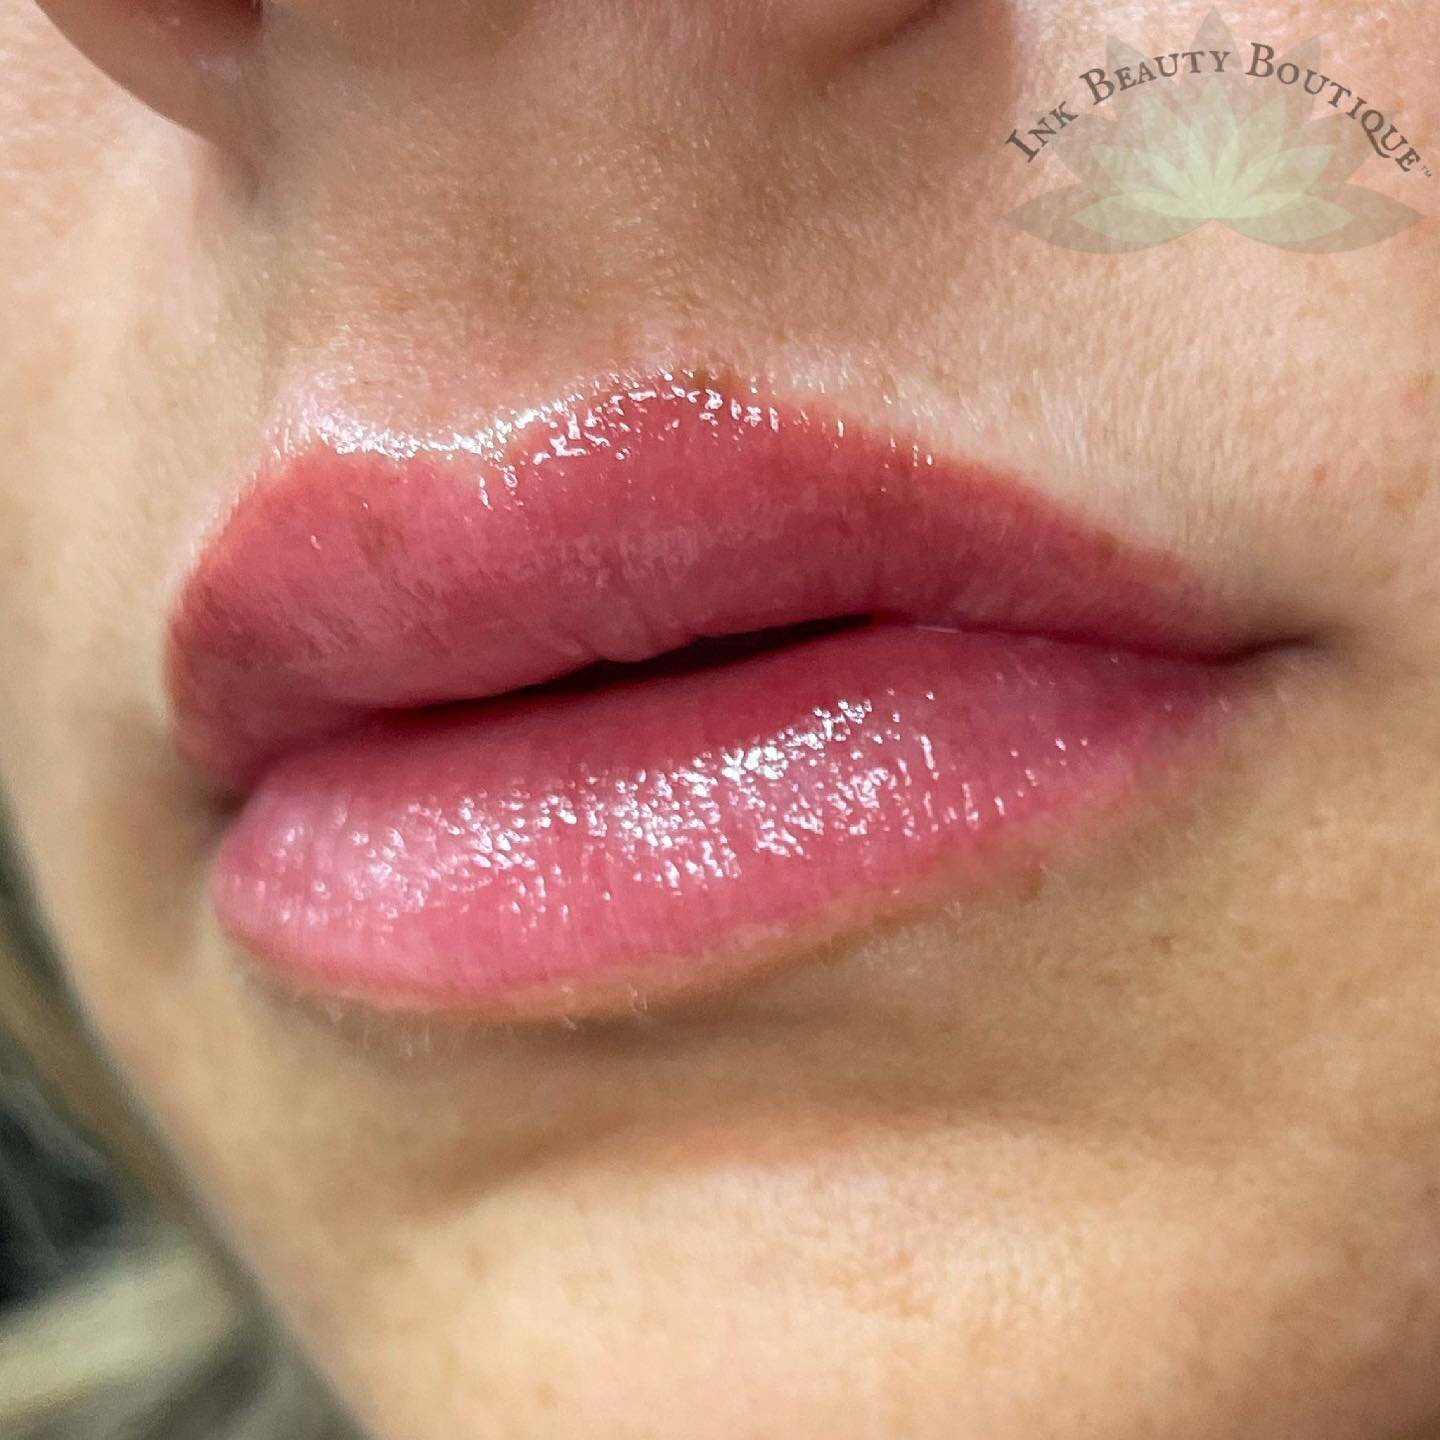 Freshly blushed lips plumped with color 💕 lip blush tattoo can enhance and redefine your lips. swipe to see before! 

You can book with me by clicking book now in my bio 🗓 I&rsquo;m here for you, DM or email me if you have any questions 😘

#portla